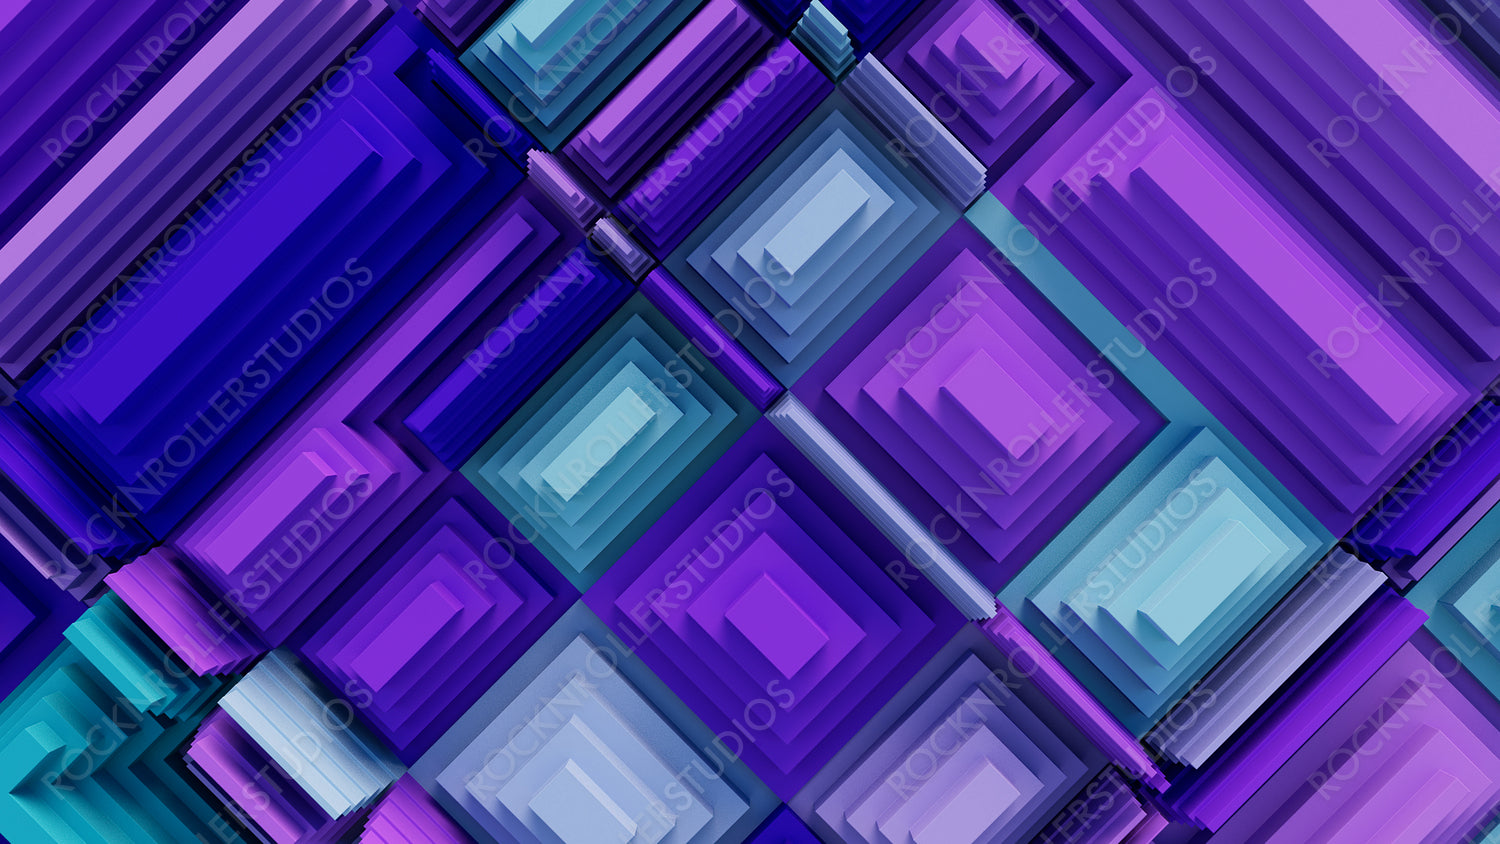 Purple and Turquoise Tech Background with a Geometric 3D Structure. Clean, Stepped design with Extruded Futuristic Forms. 3D Render.